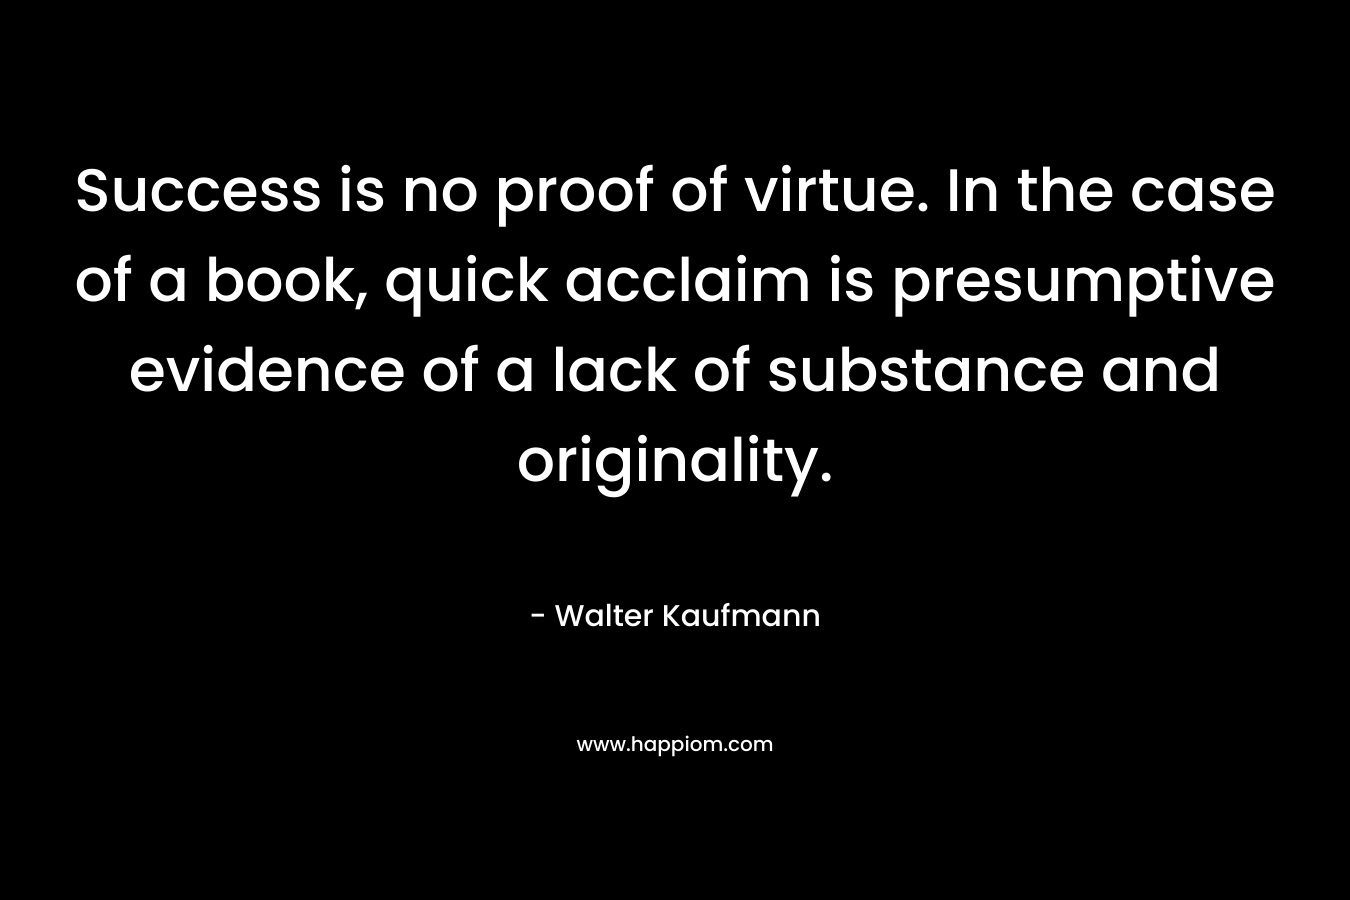 Success is no proof of virtue. In the case of a book, quick acclaim is presumptive evidence of a lack of substance and originality. – Walter Kaufmann